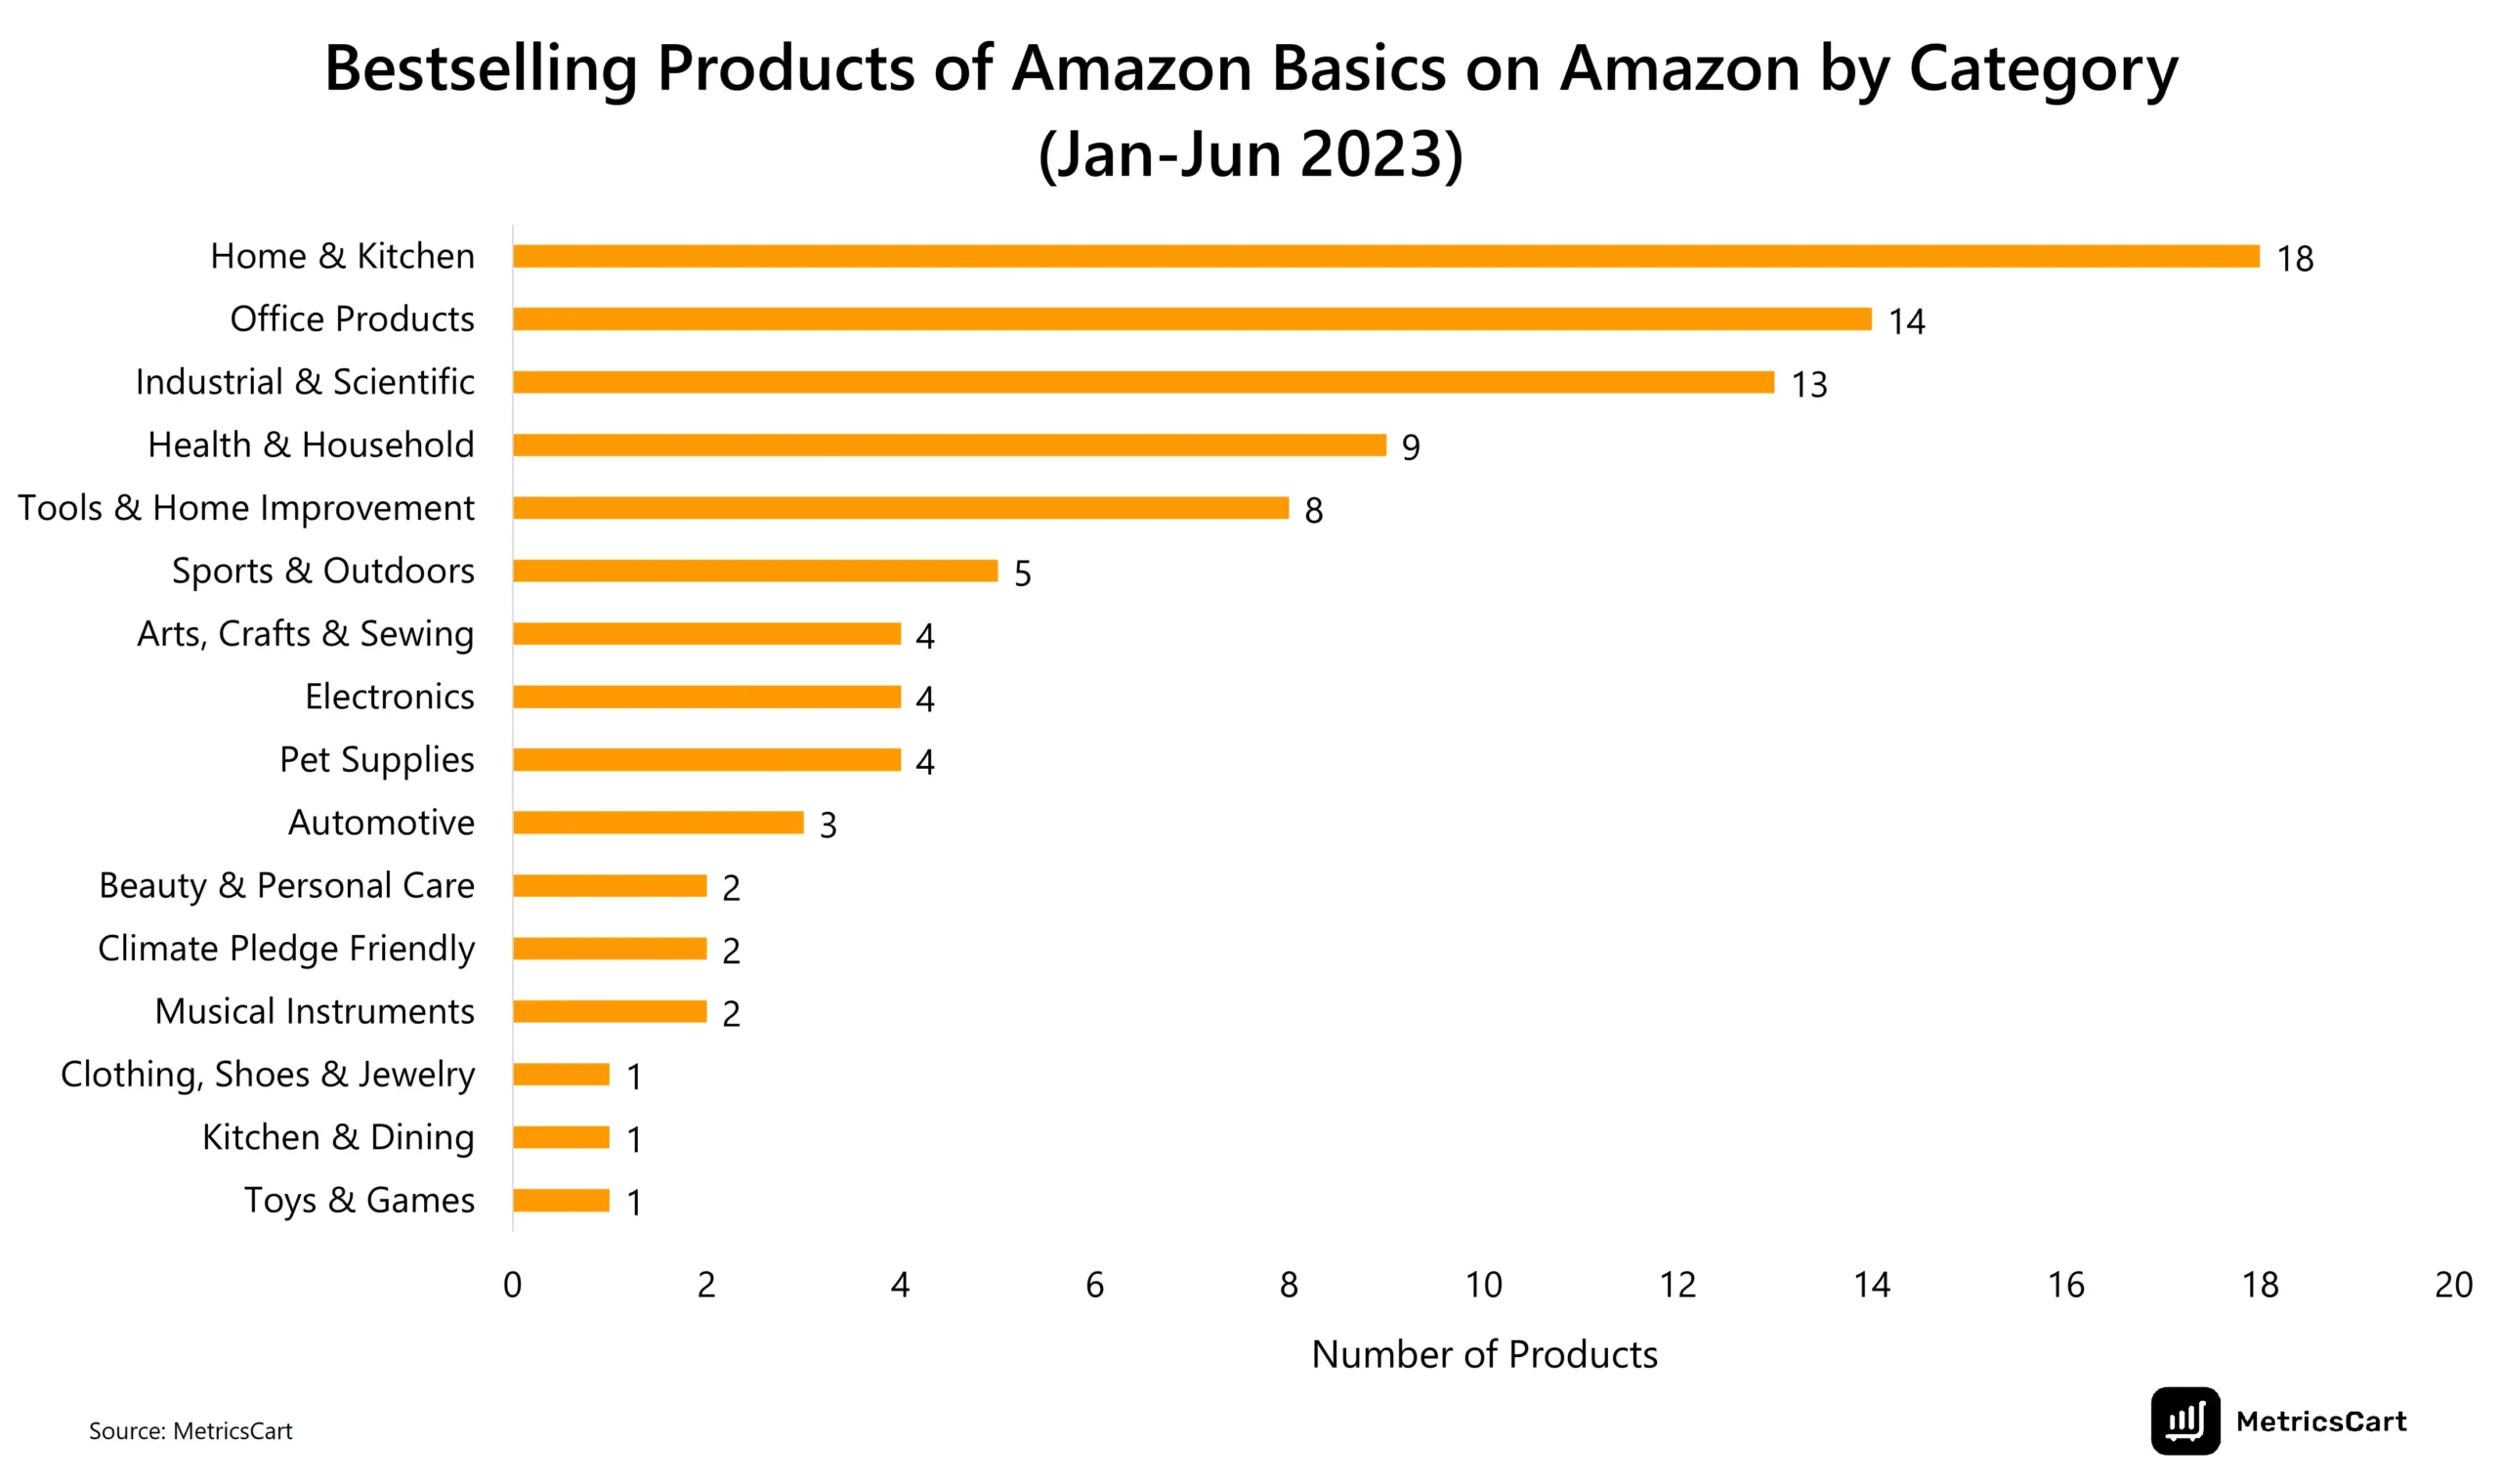 chart showing bestselling amazon basics products by category